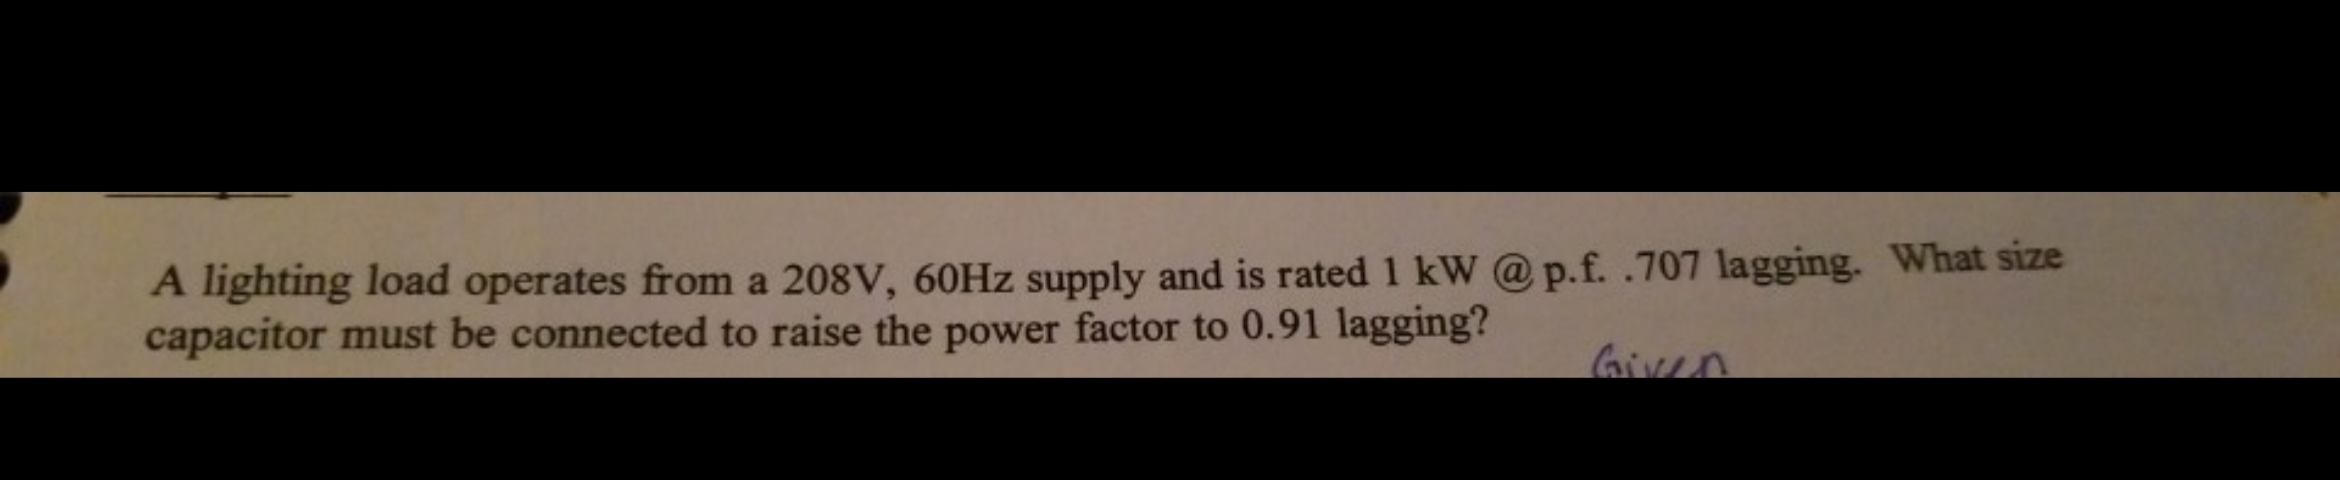 A lighting load operates from a 208V, 60Hz supply and is rated 1 kW @ p.f. .707 lagging. What size
capacitor must be connected to raise the power factor to 0.91 lagging?
Gien
